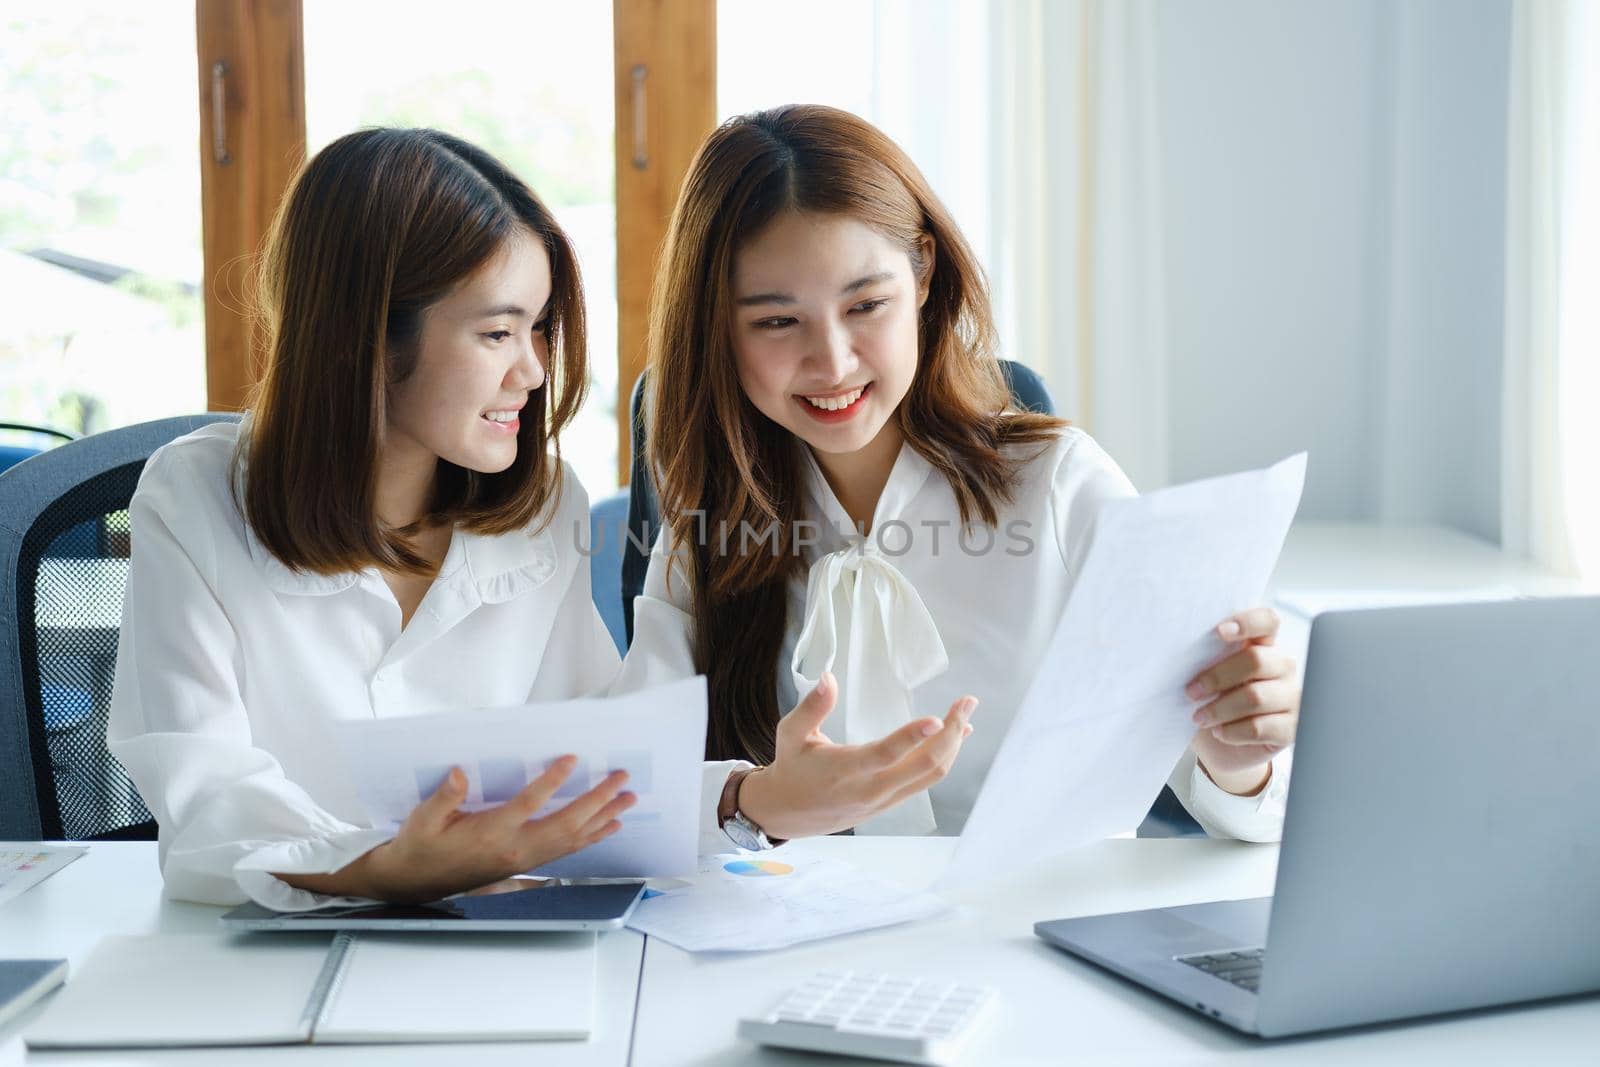 Consulting, learning, marketing, investment, finance, data analysis, research, two Asian women smiling and holding papers, sitting and analyzing financial statements and using computers at work. by Manastrong